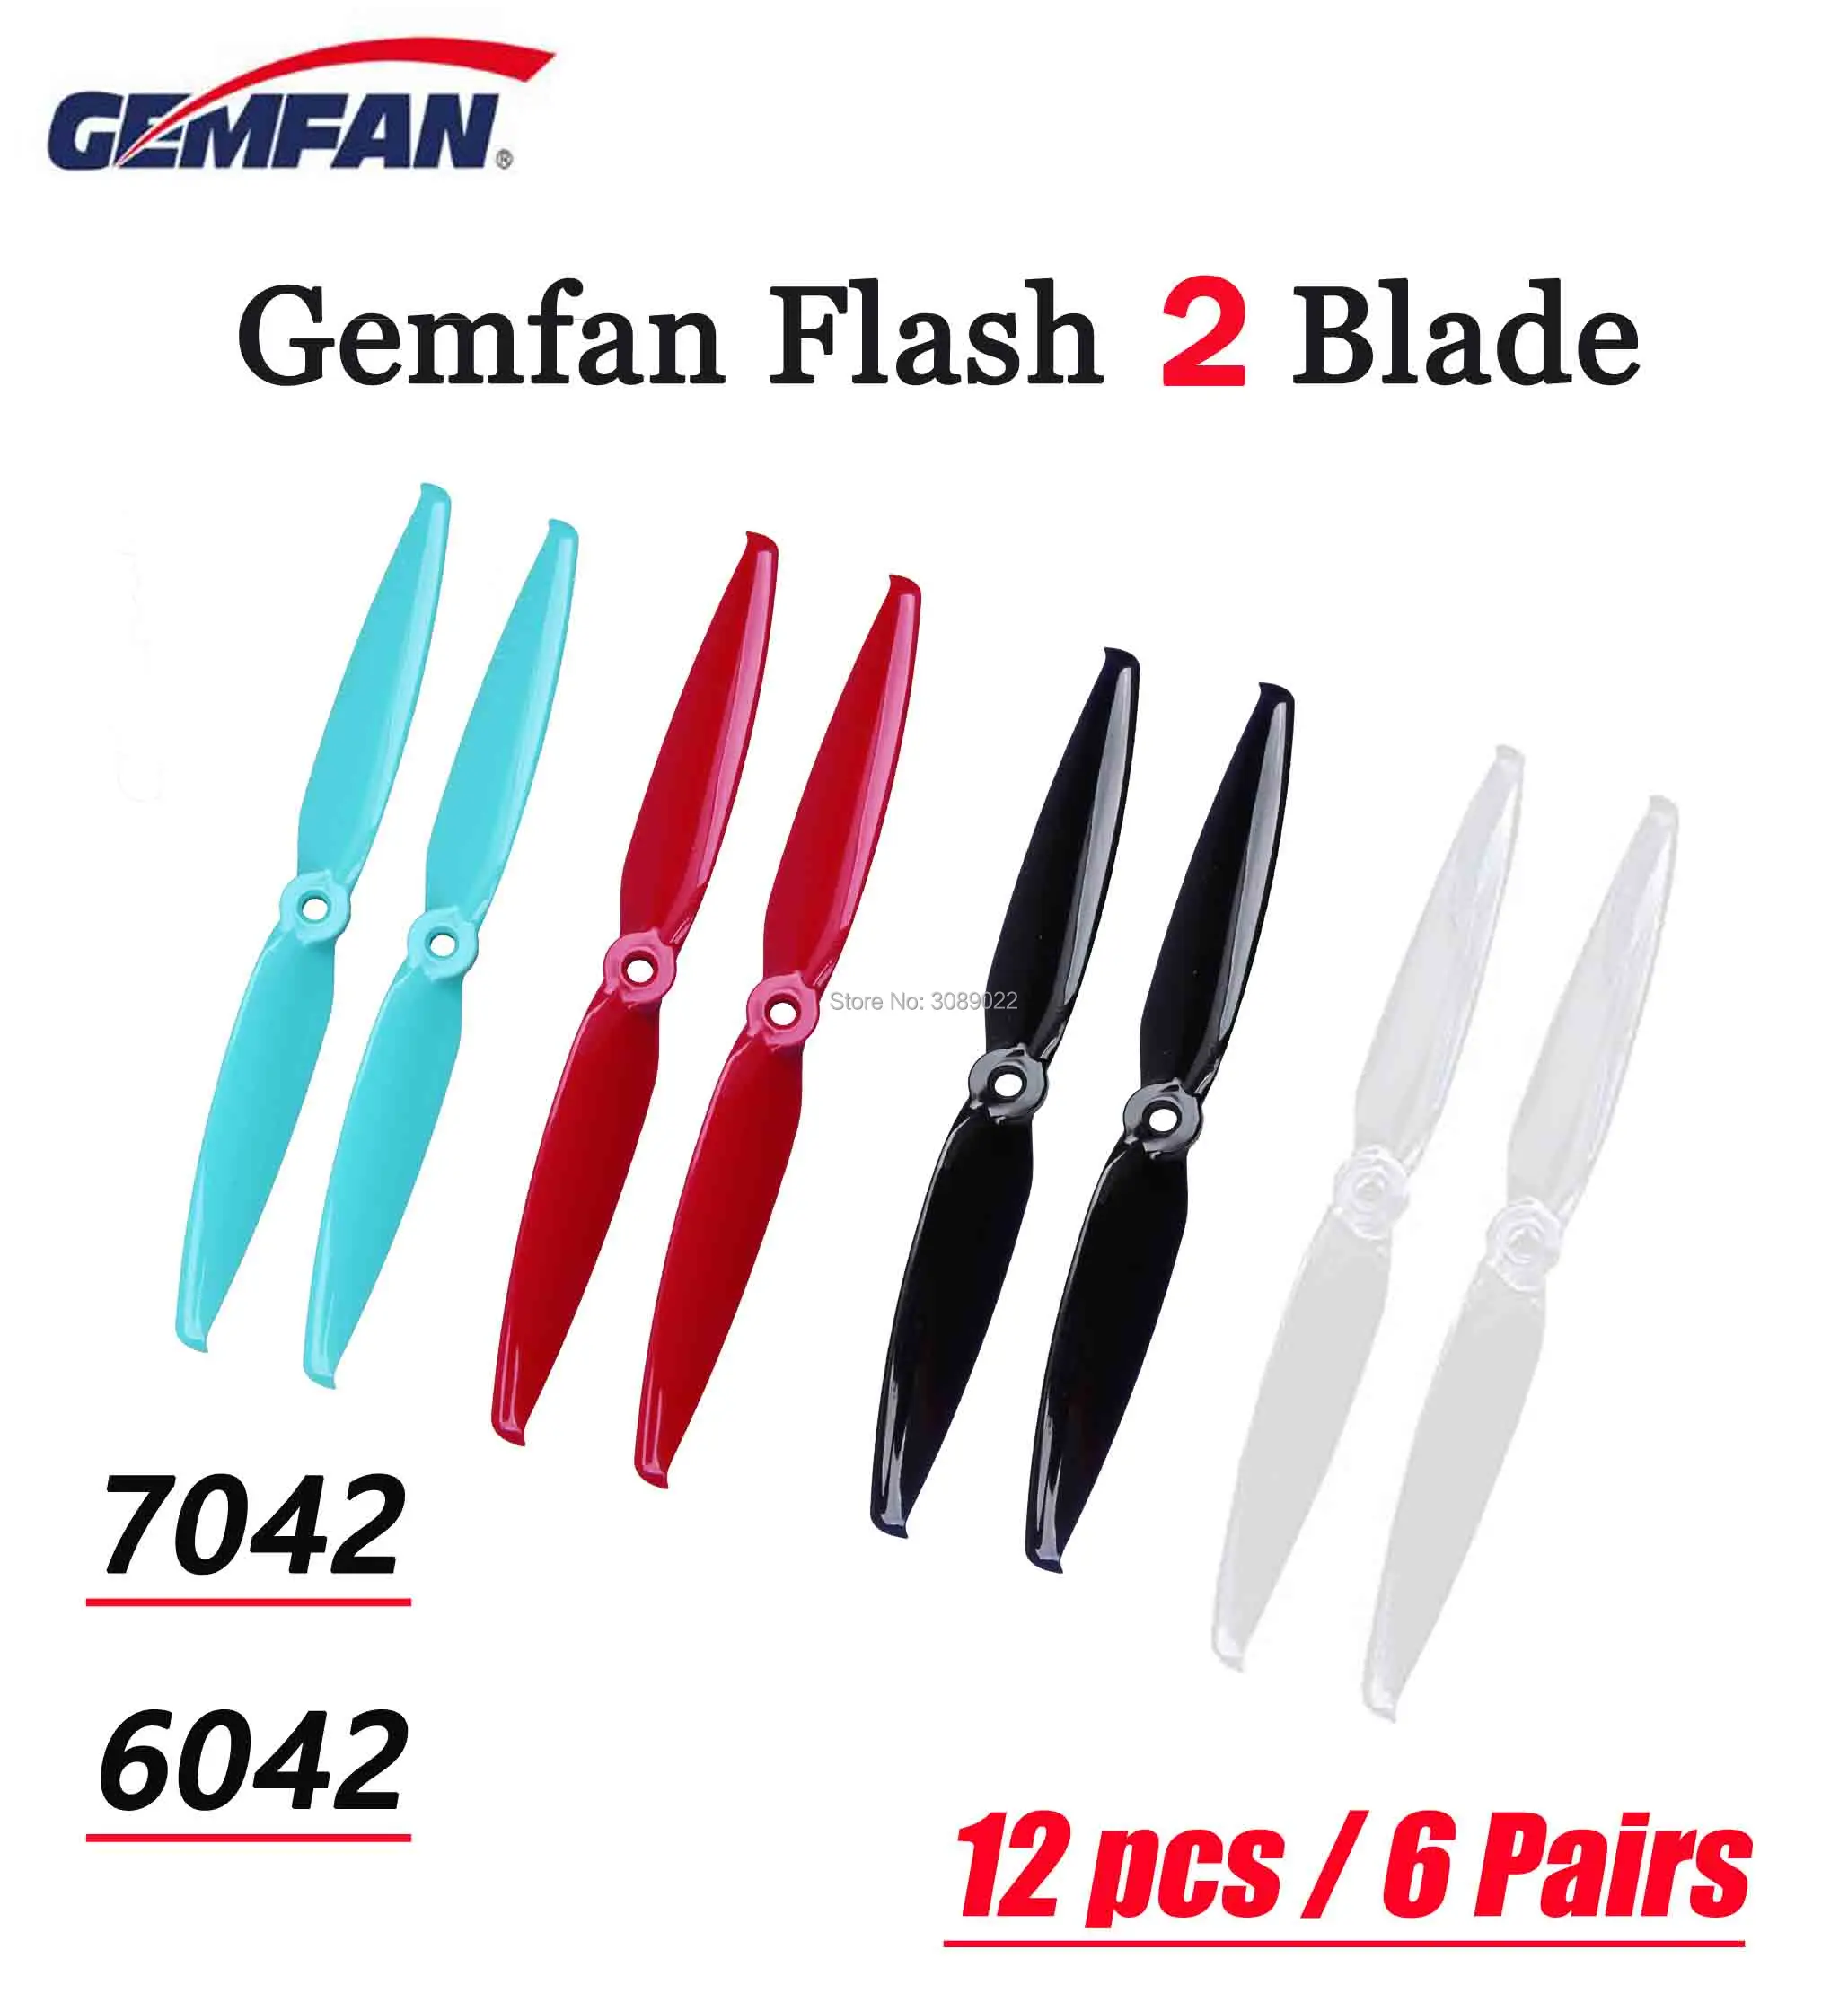 2 Pairs Gemfan Flash 7042 7.0x4.2 PC 2-blade Propeller 5mm Mounting hole 